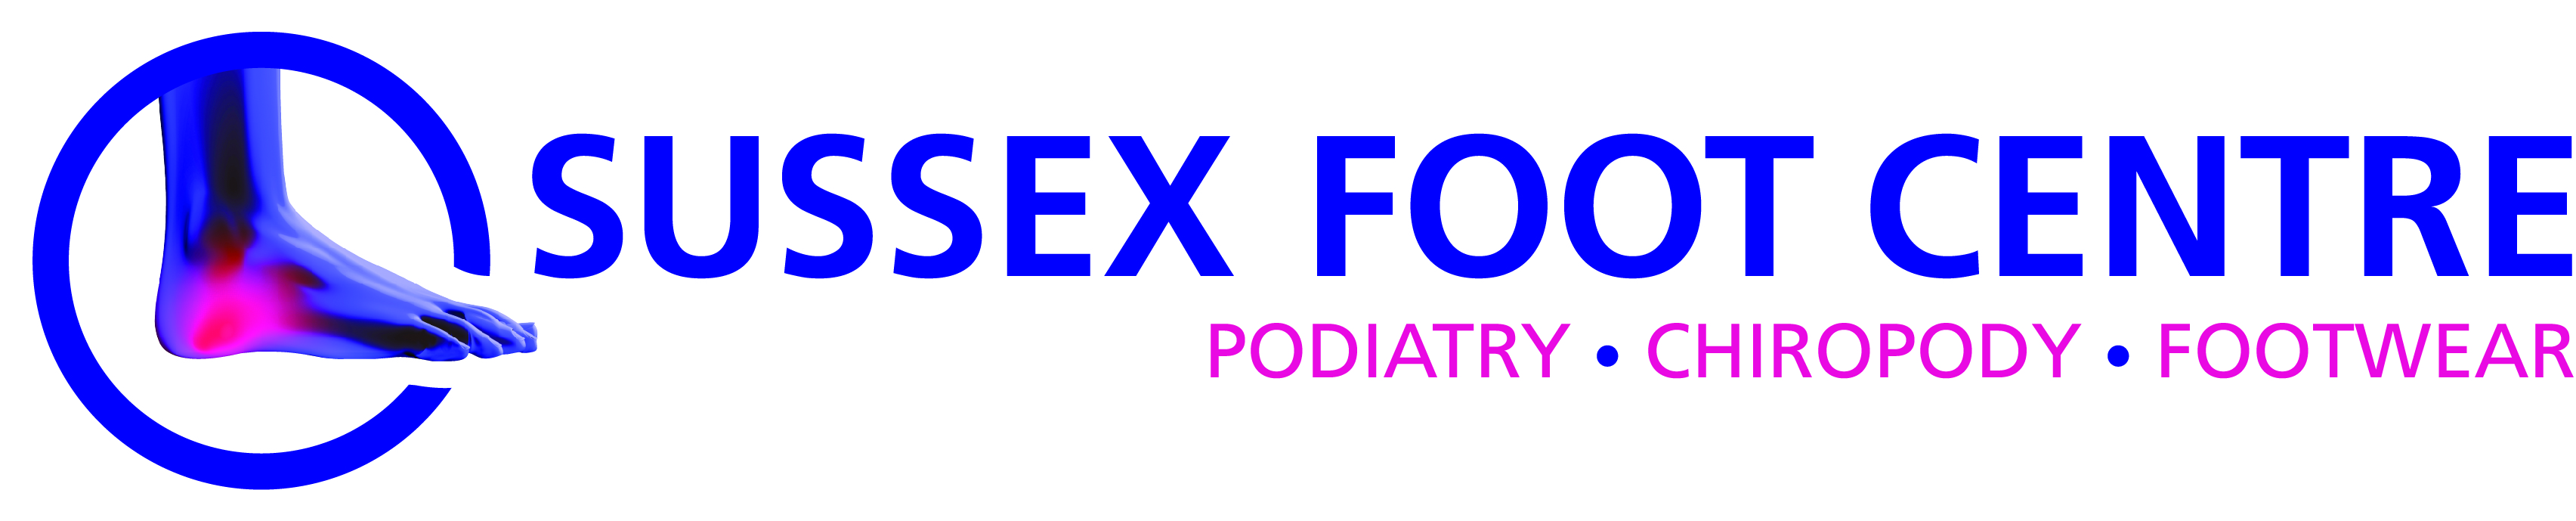 www.sussexfootcentre.co.uk